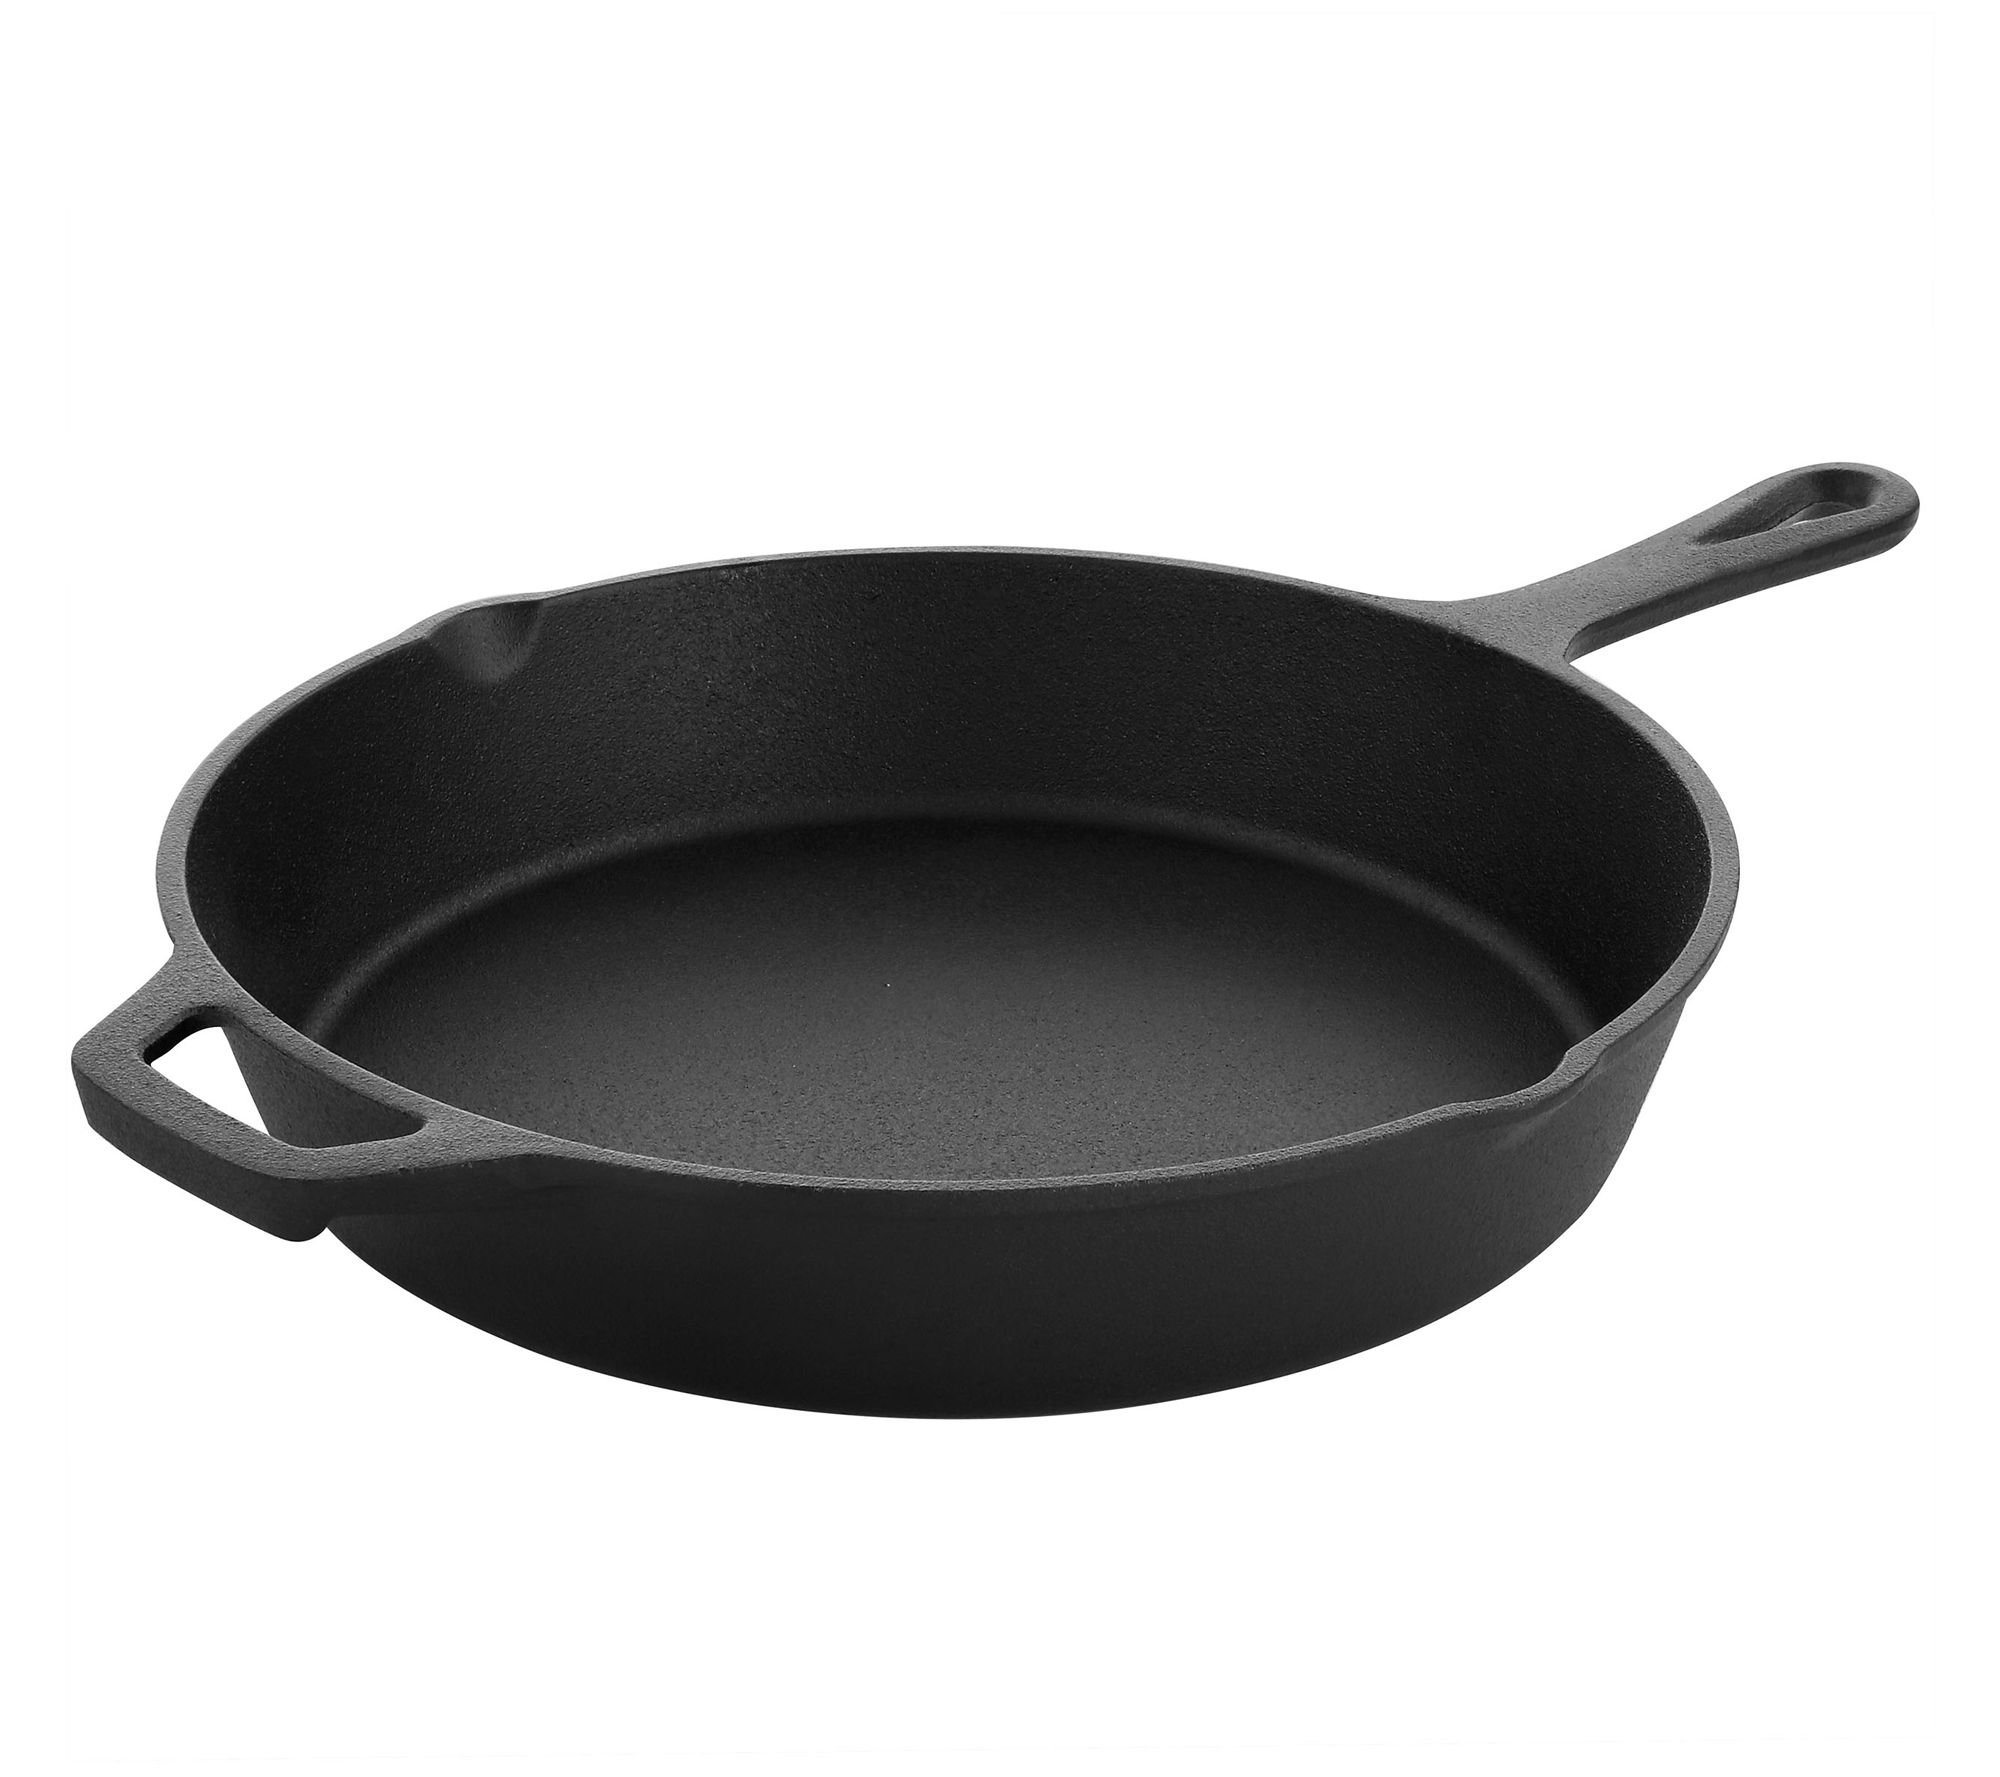 MegaChef 10 inch Round Cast Iron Frying Pan wit h Handle 